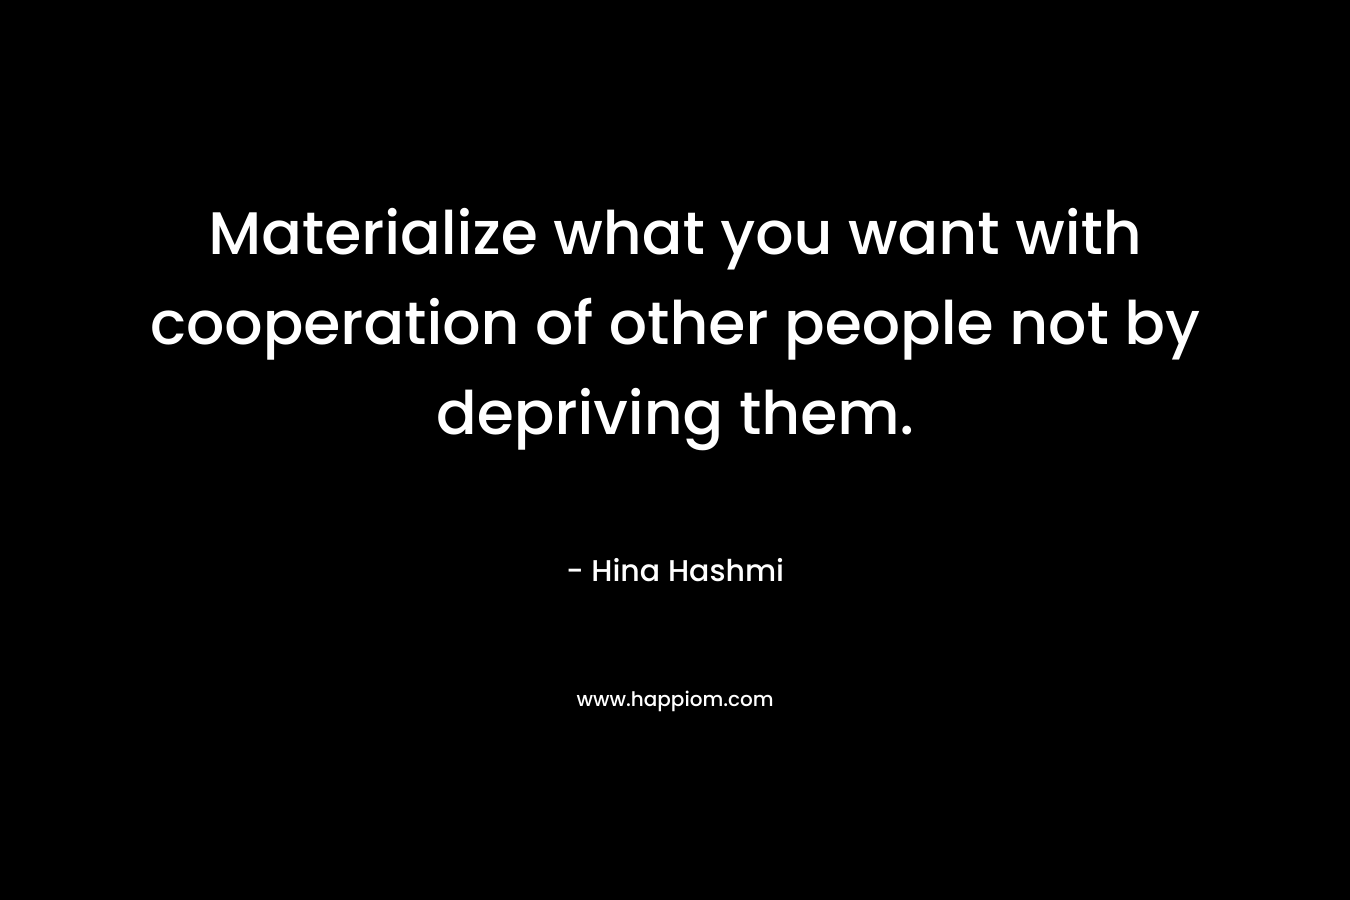 Materialize what you want with cooperation of other people not by depriving them.